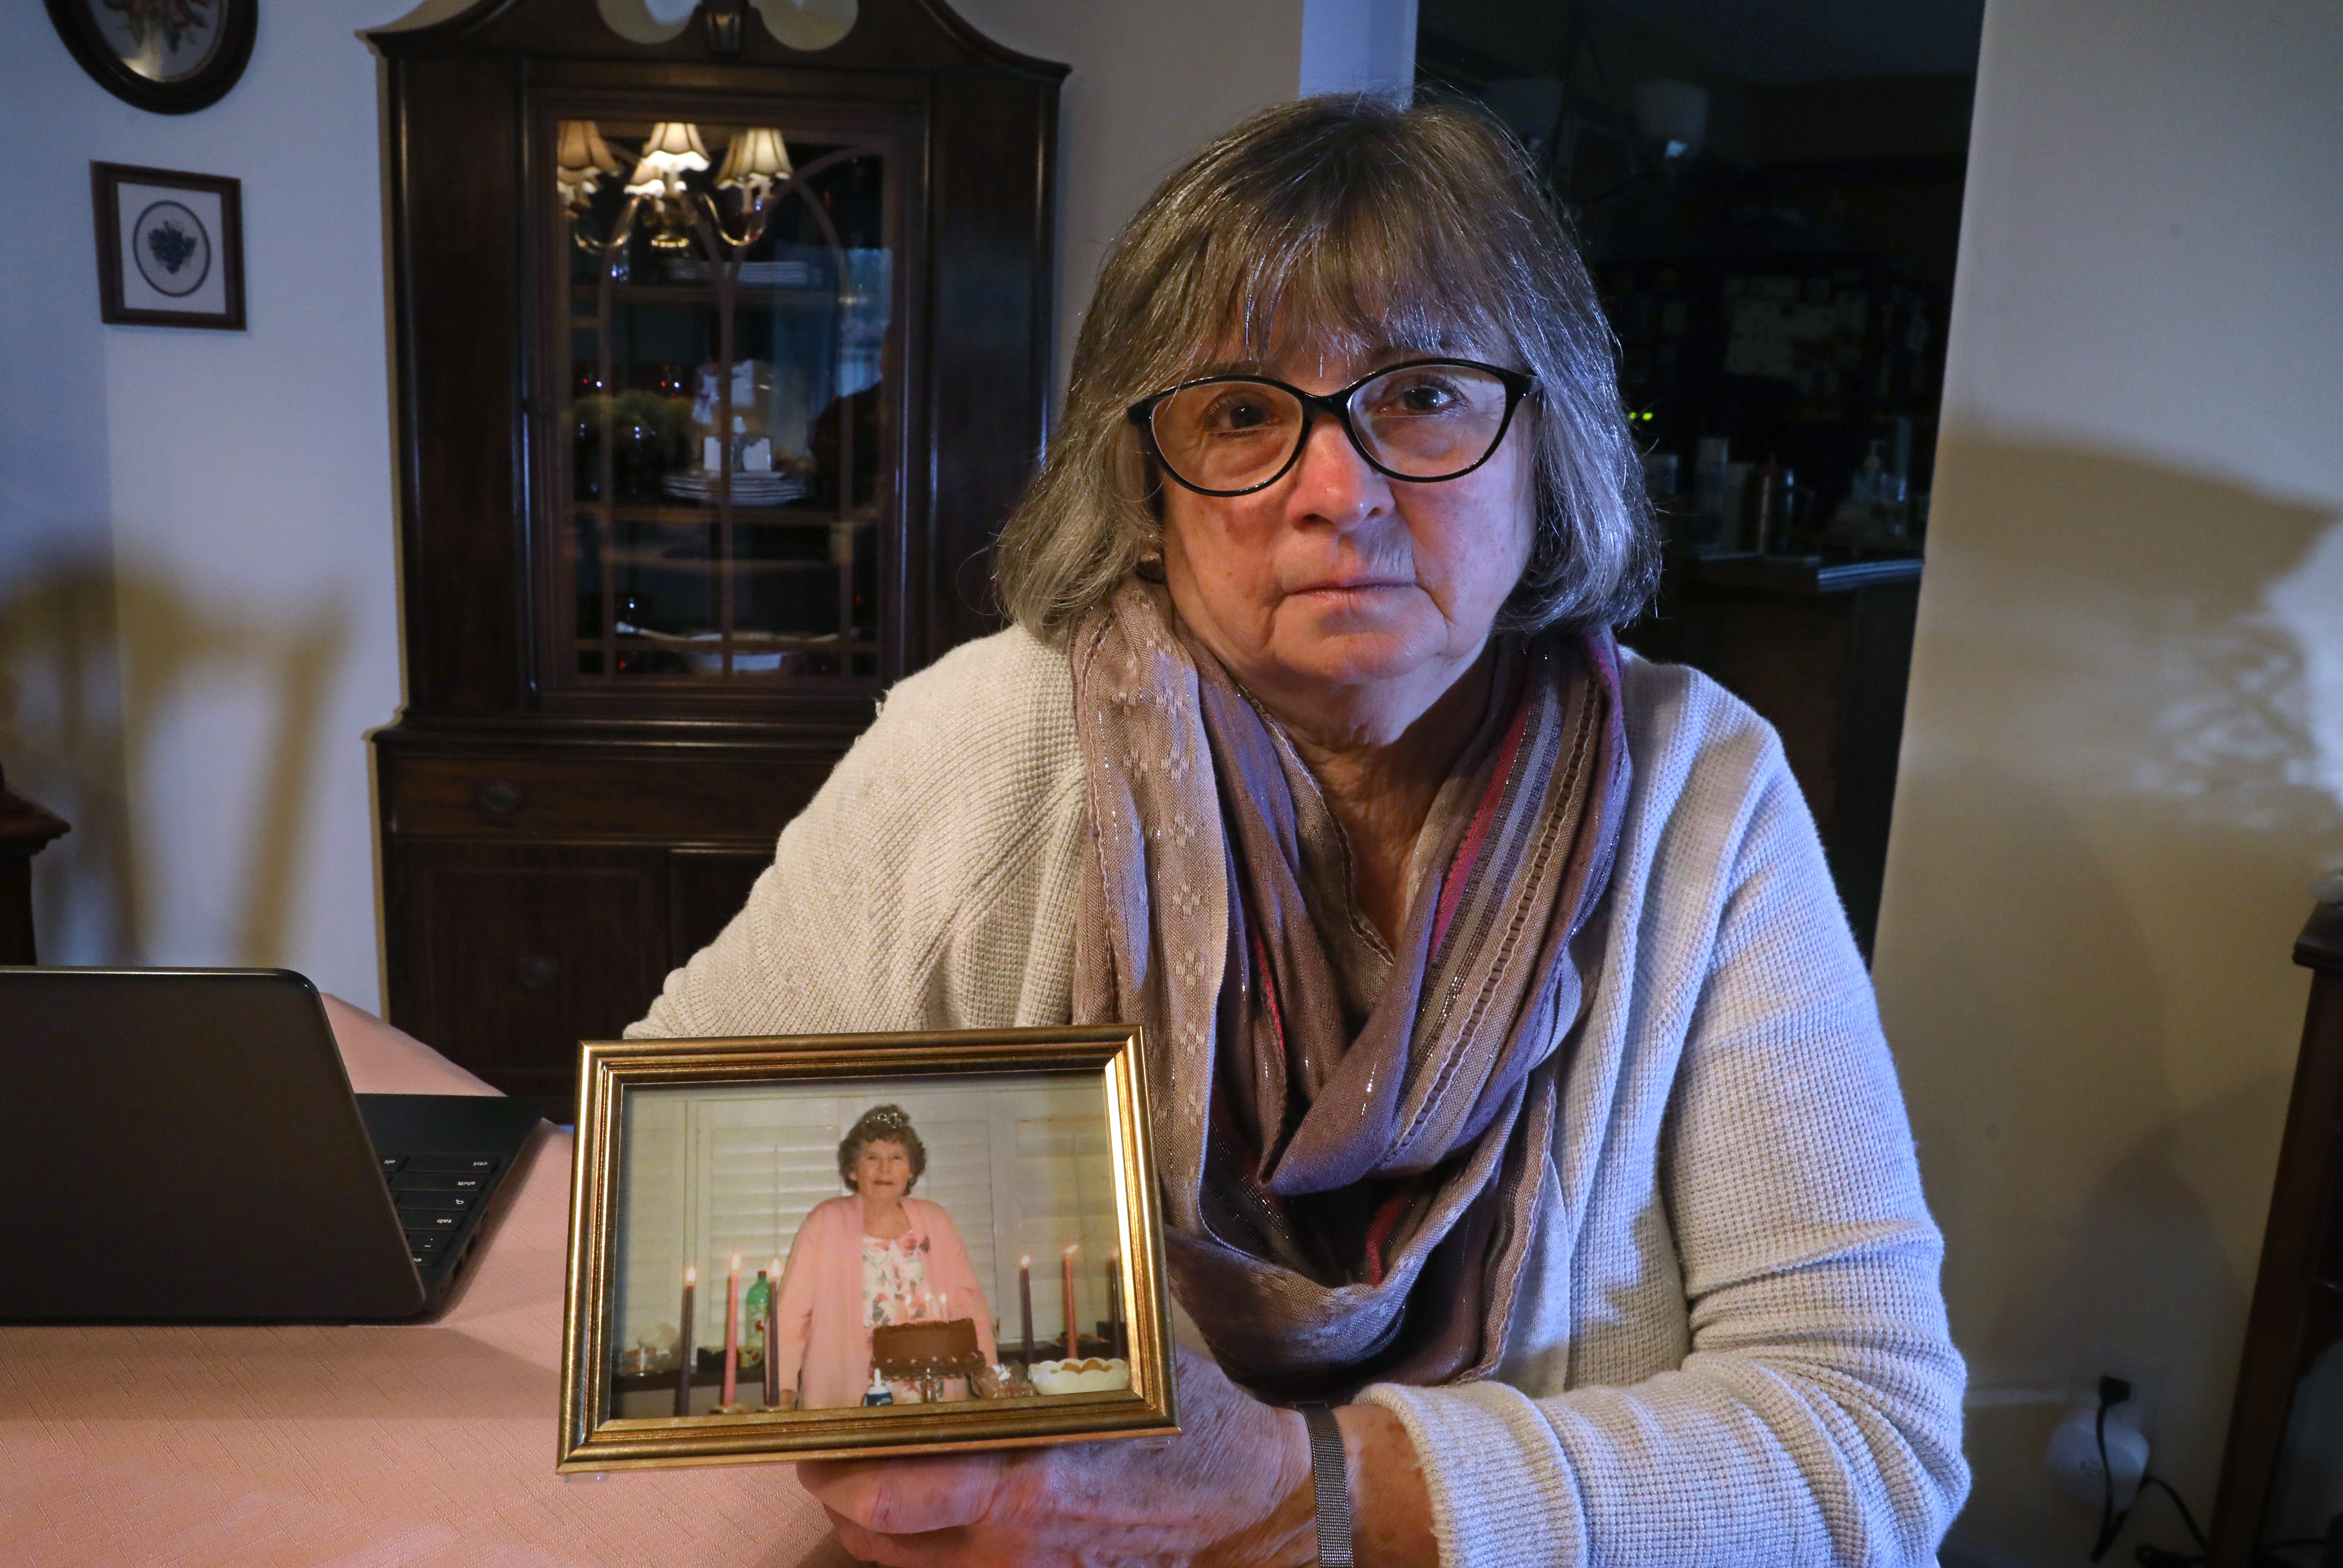 Jeannie Wells with a photo of her mother, Janet Deisenroth, at her home in Irondequoit Thursday, April 21, 2022. The photo was taken at Janet's 90th birthday party in April, 2018. She died Dec. 2, 2021 while a resident at The Hurlbut Nursing Home in Henrietta.